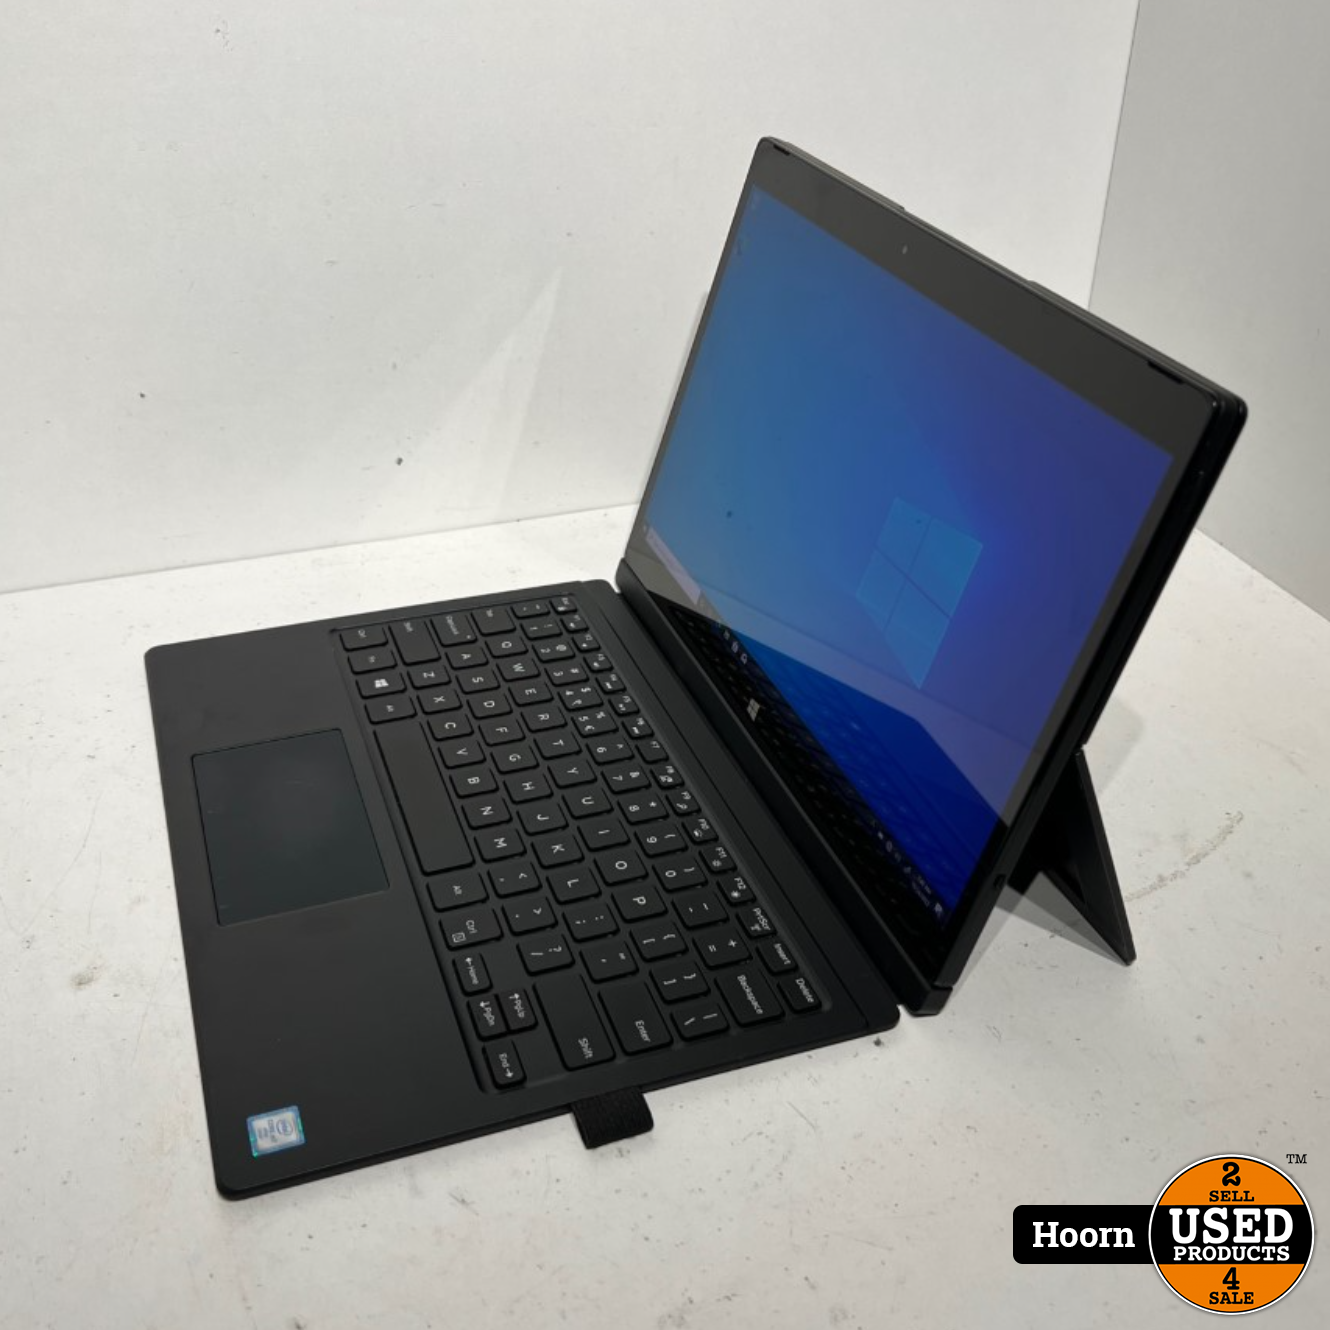 dell Dell Latitude 7275 K14M 2in1 Laptop Met Type Cover en Lader | Intel Core M7 | 8GB Ram | 256GB SSD - Products Hoorn